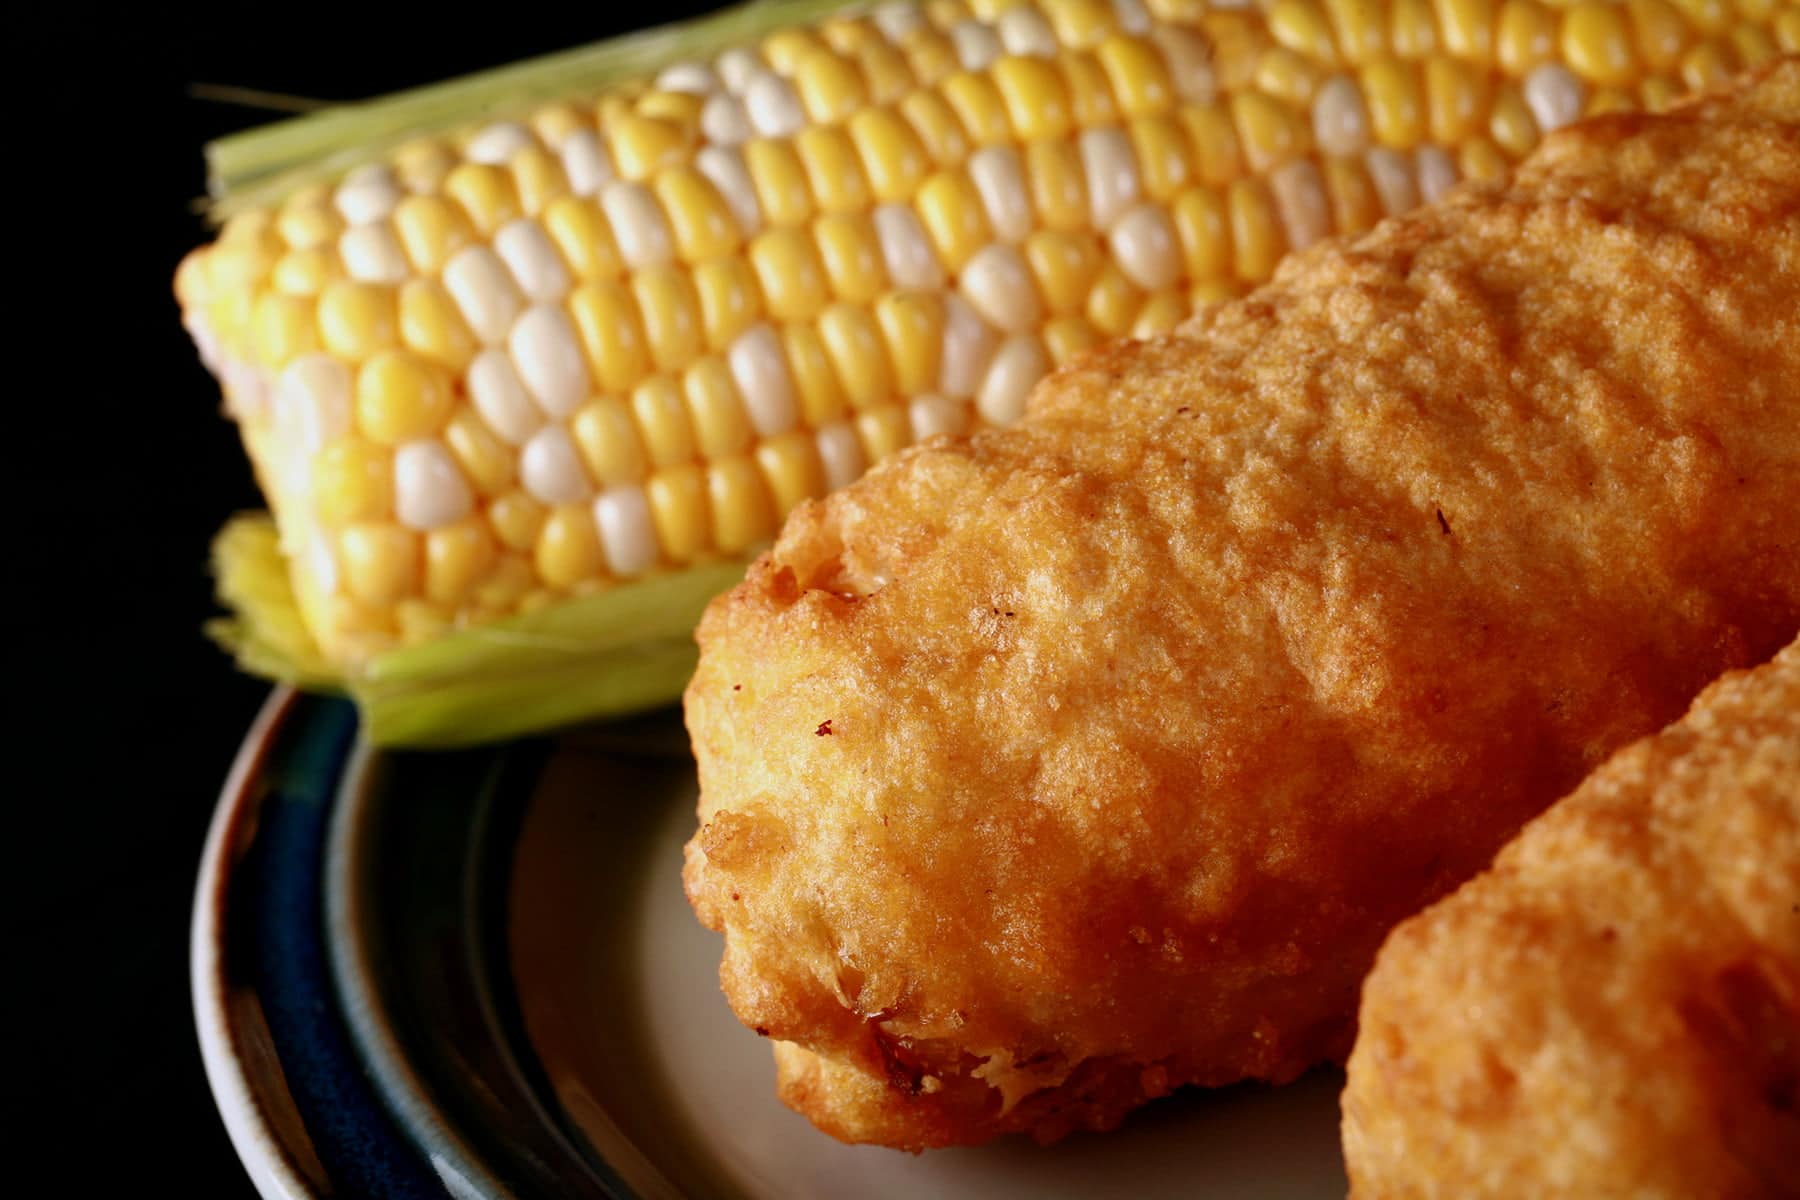 3 cobs of corn - 1 fresh, 2 battered and deep fried - are lined up on a plate.